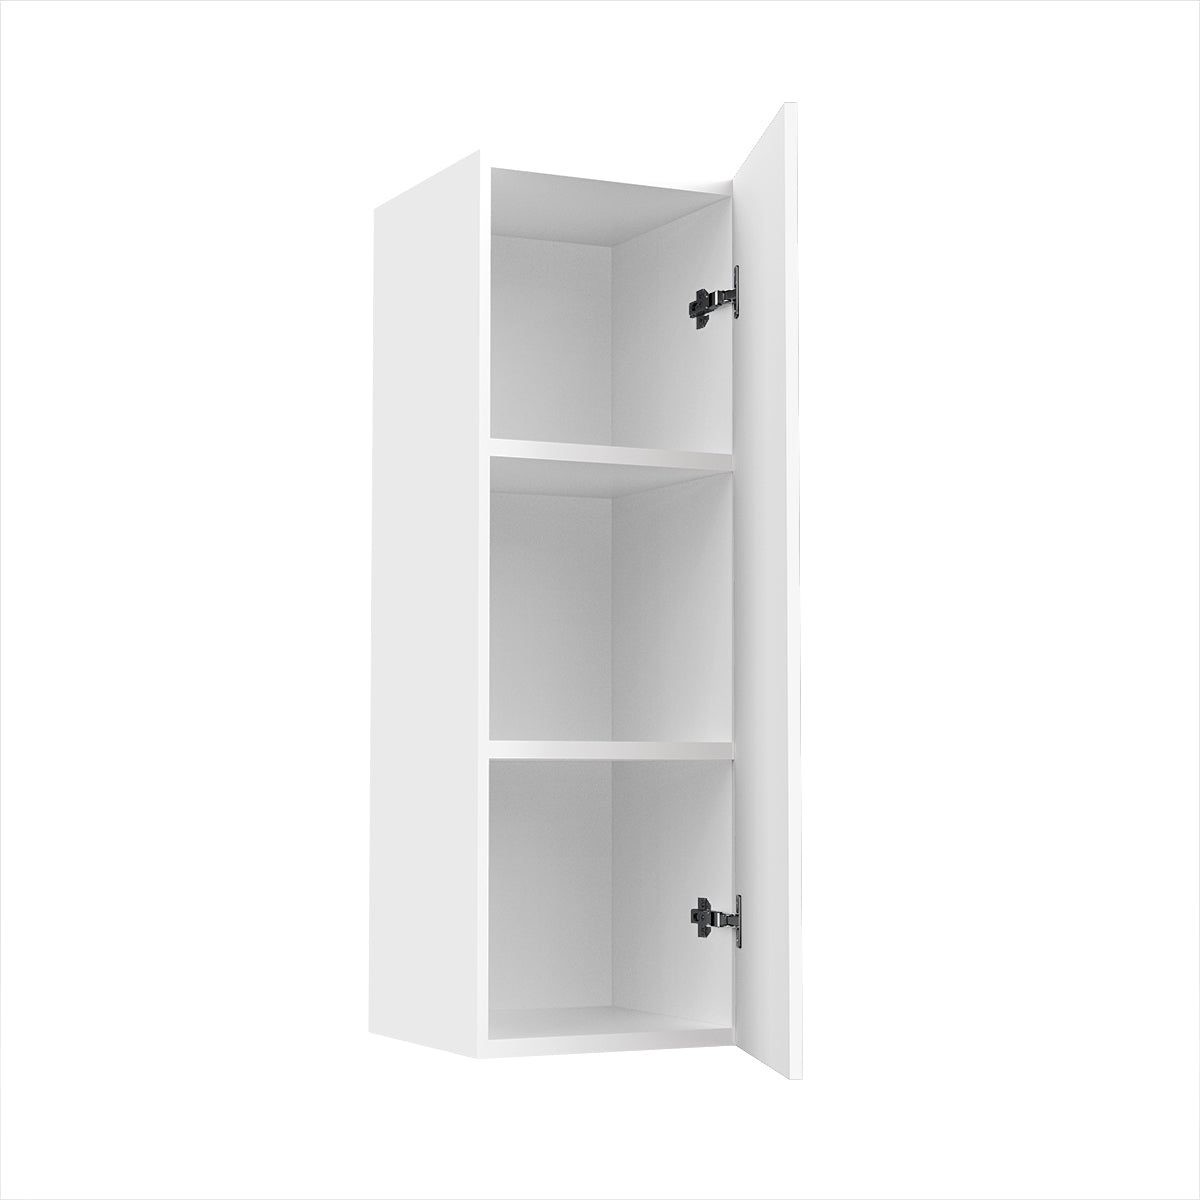 RTA - Glossy White - Single Door Wall Cabinets | 12"W x 36"H x 12"D